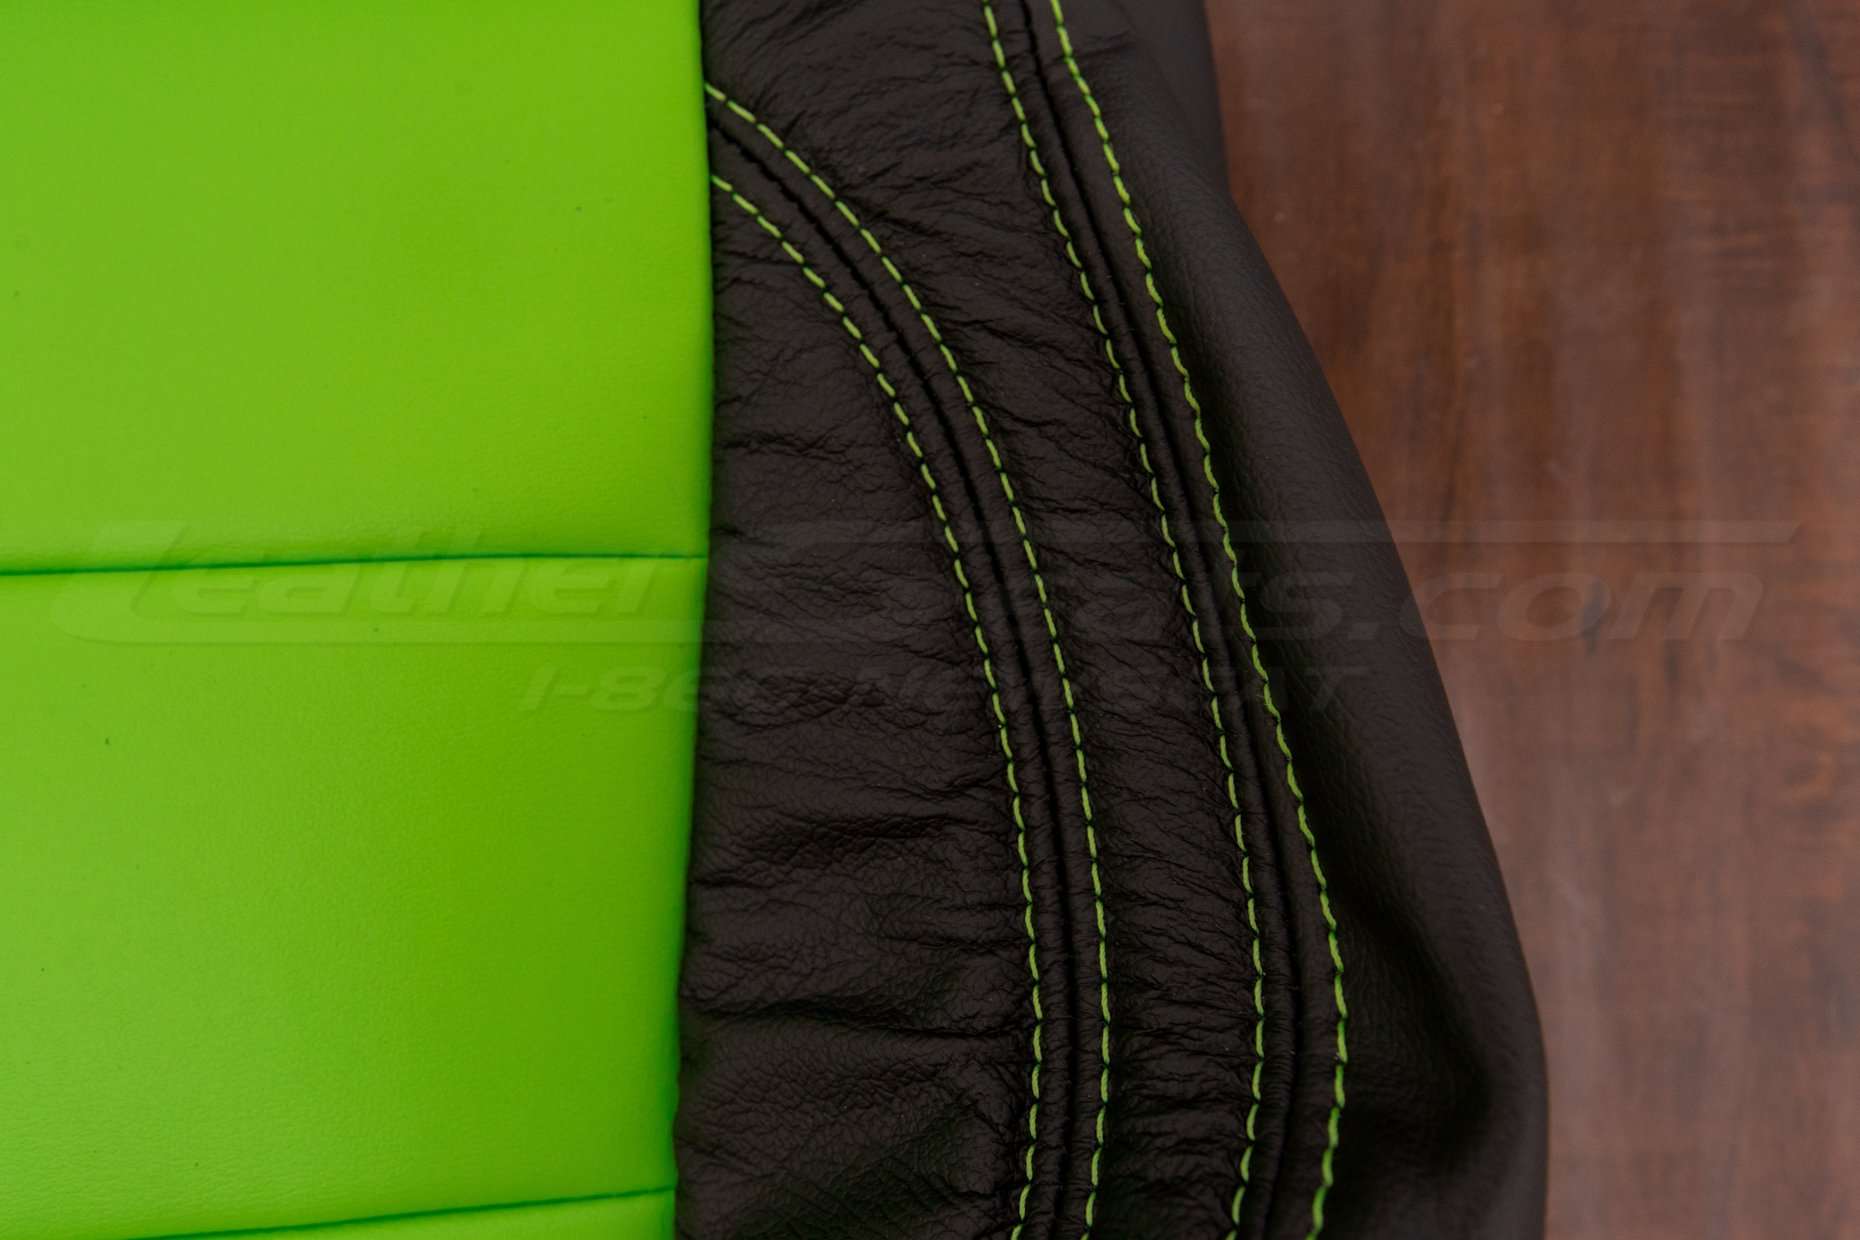 Jeep Wrangler Upholstery Kit - Black & Lime Green - Backrest lime green double-stitching